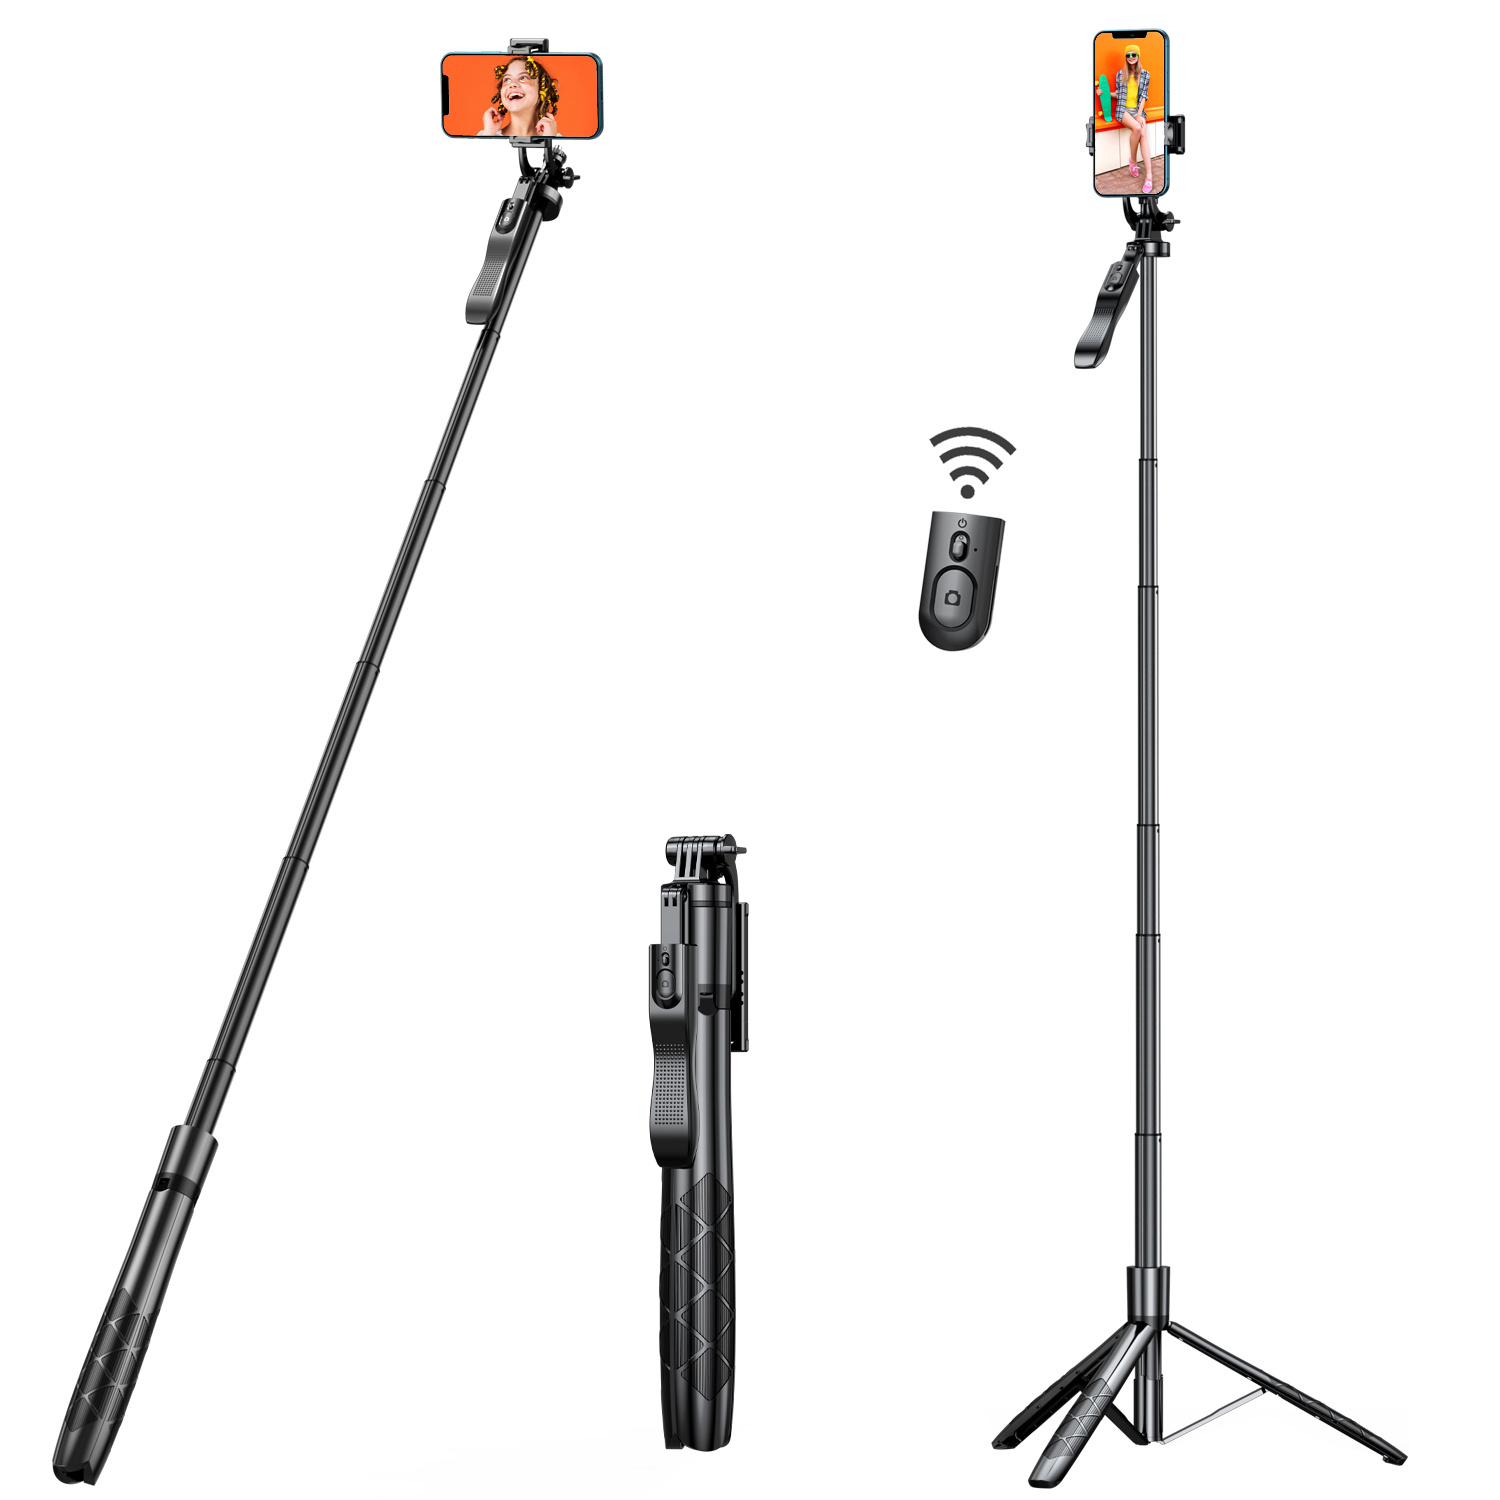  ATUMTEK 51 Selfie Stick Tripod, All in One Extendable Phone  Tripod Stand with Bluetooth Remote 360° Rotation for iPhone and Android  Phone Selfies, Video Recording, Vlogging, Live Streaming, Black : Cell